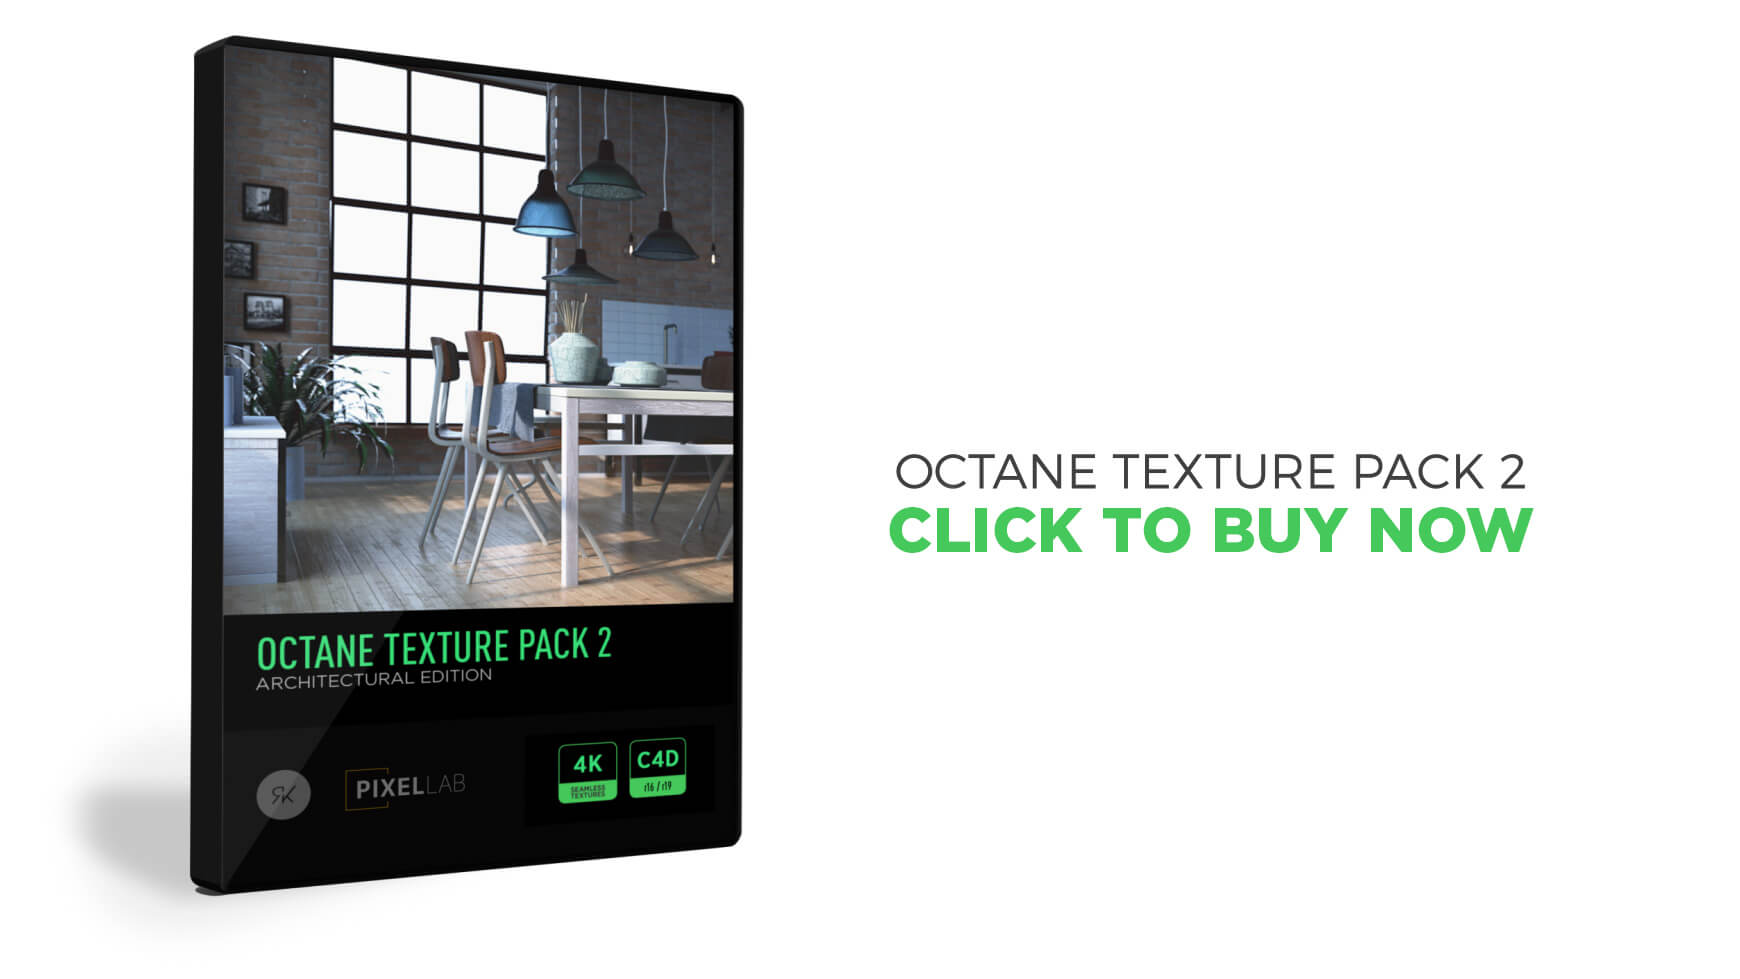 Octane Texture Pack 2 Click to Buy Now